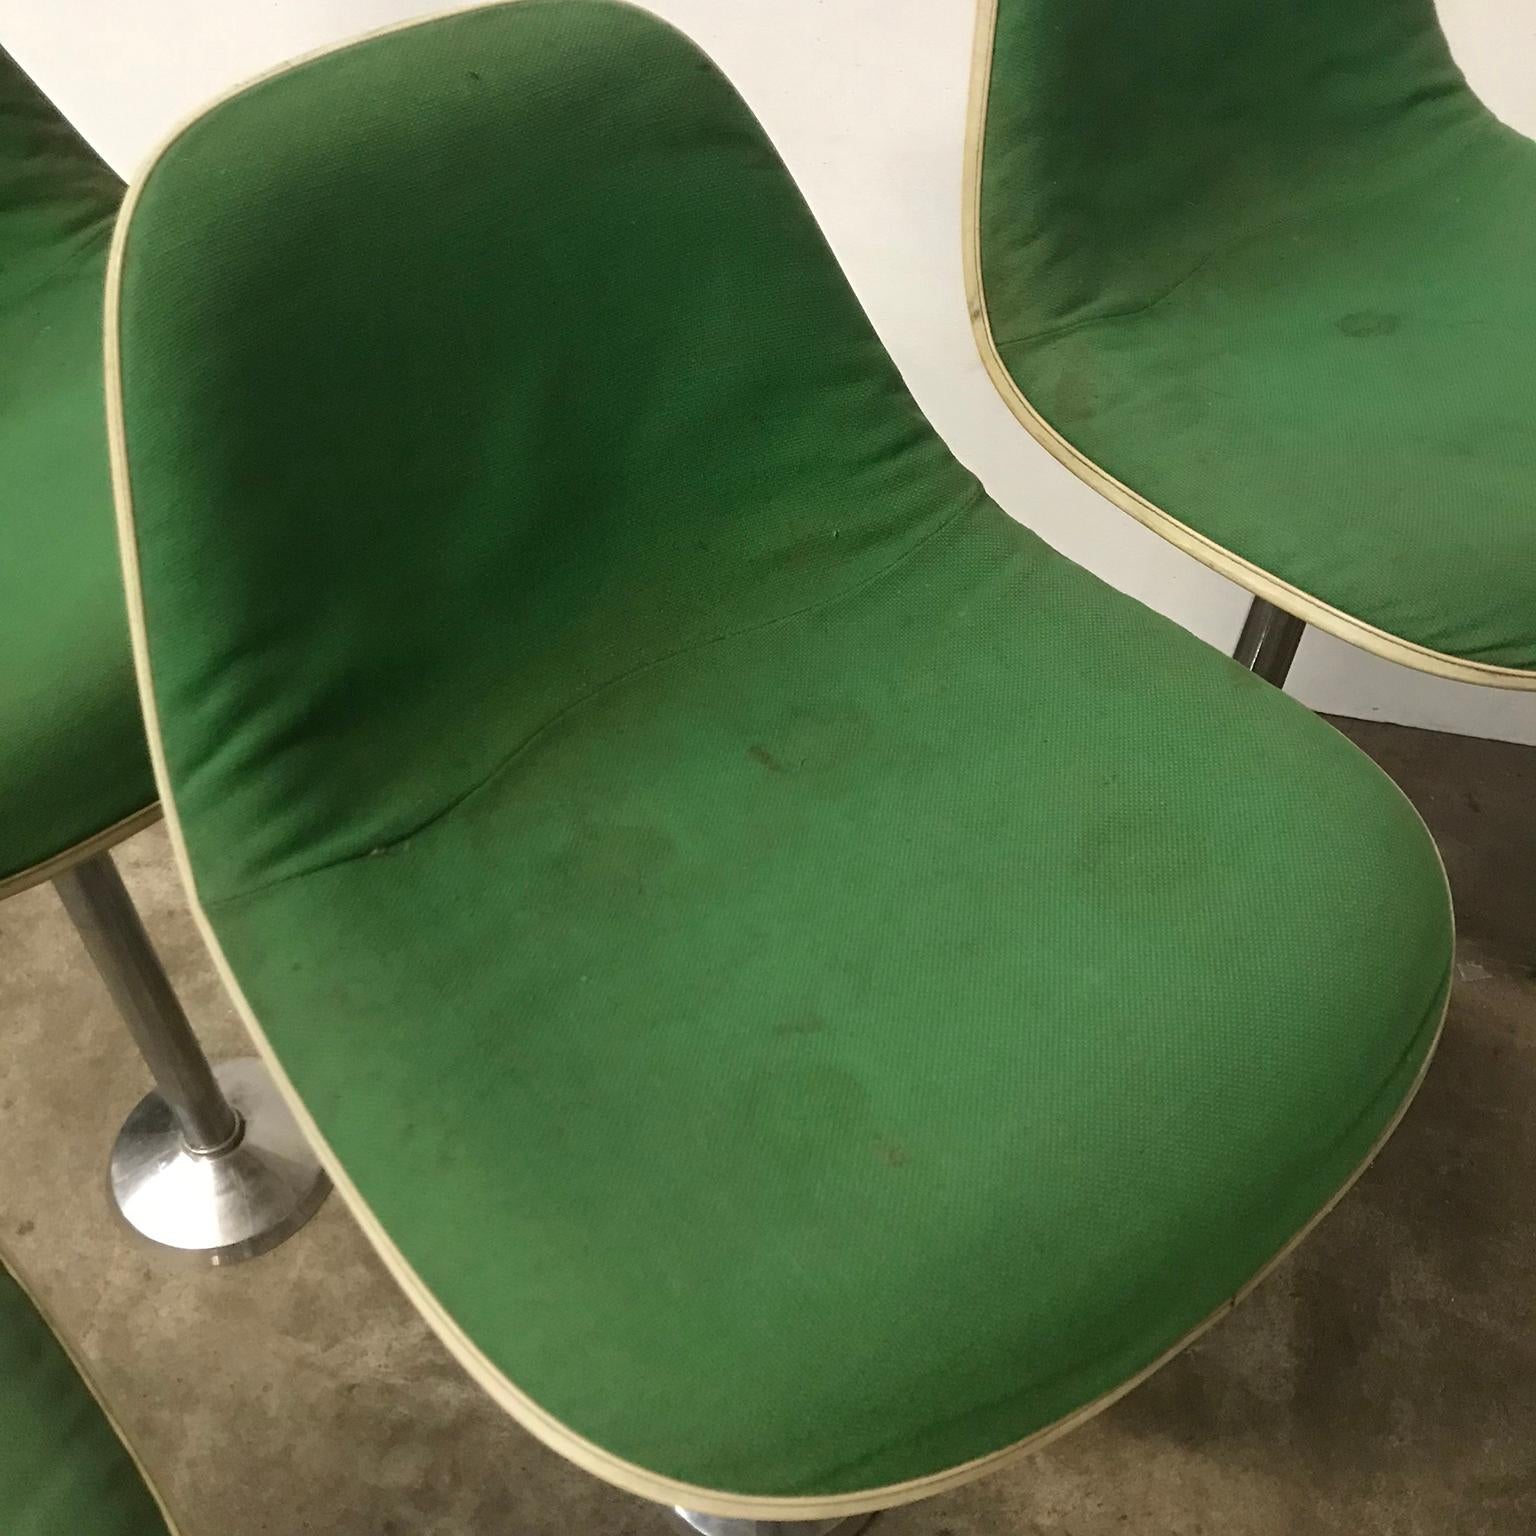 1969 Eames Herman Miller/Fehlbaum Extremely Rare White Barstools in Green Fabric For Sale 2